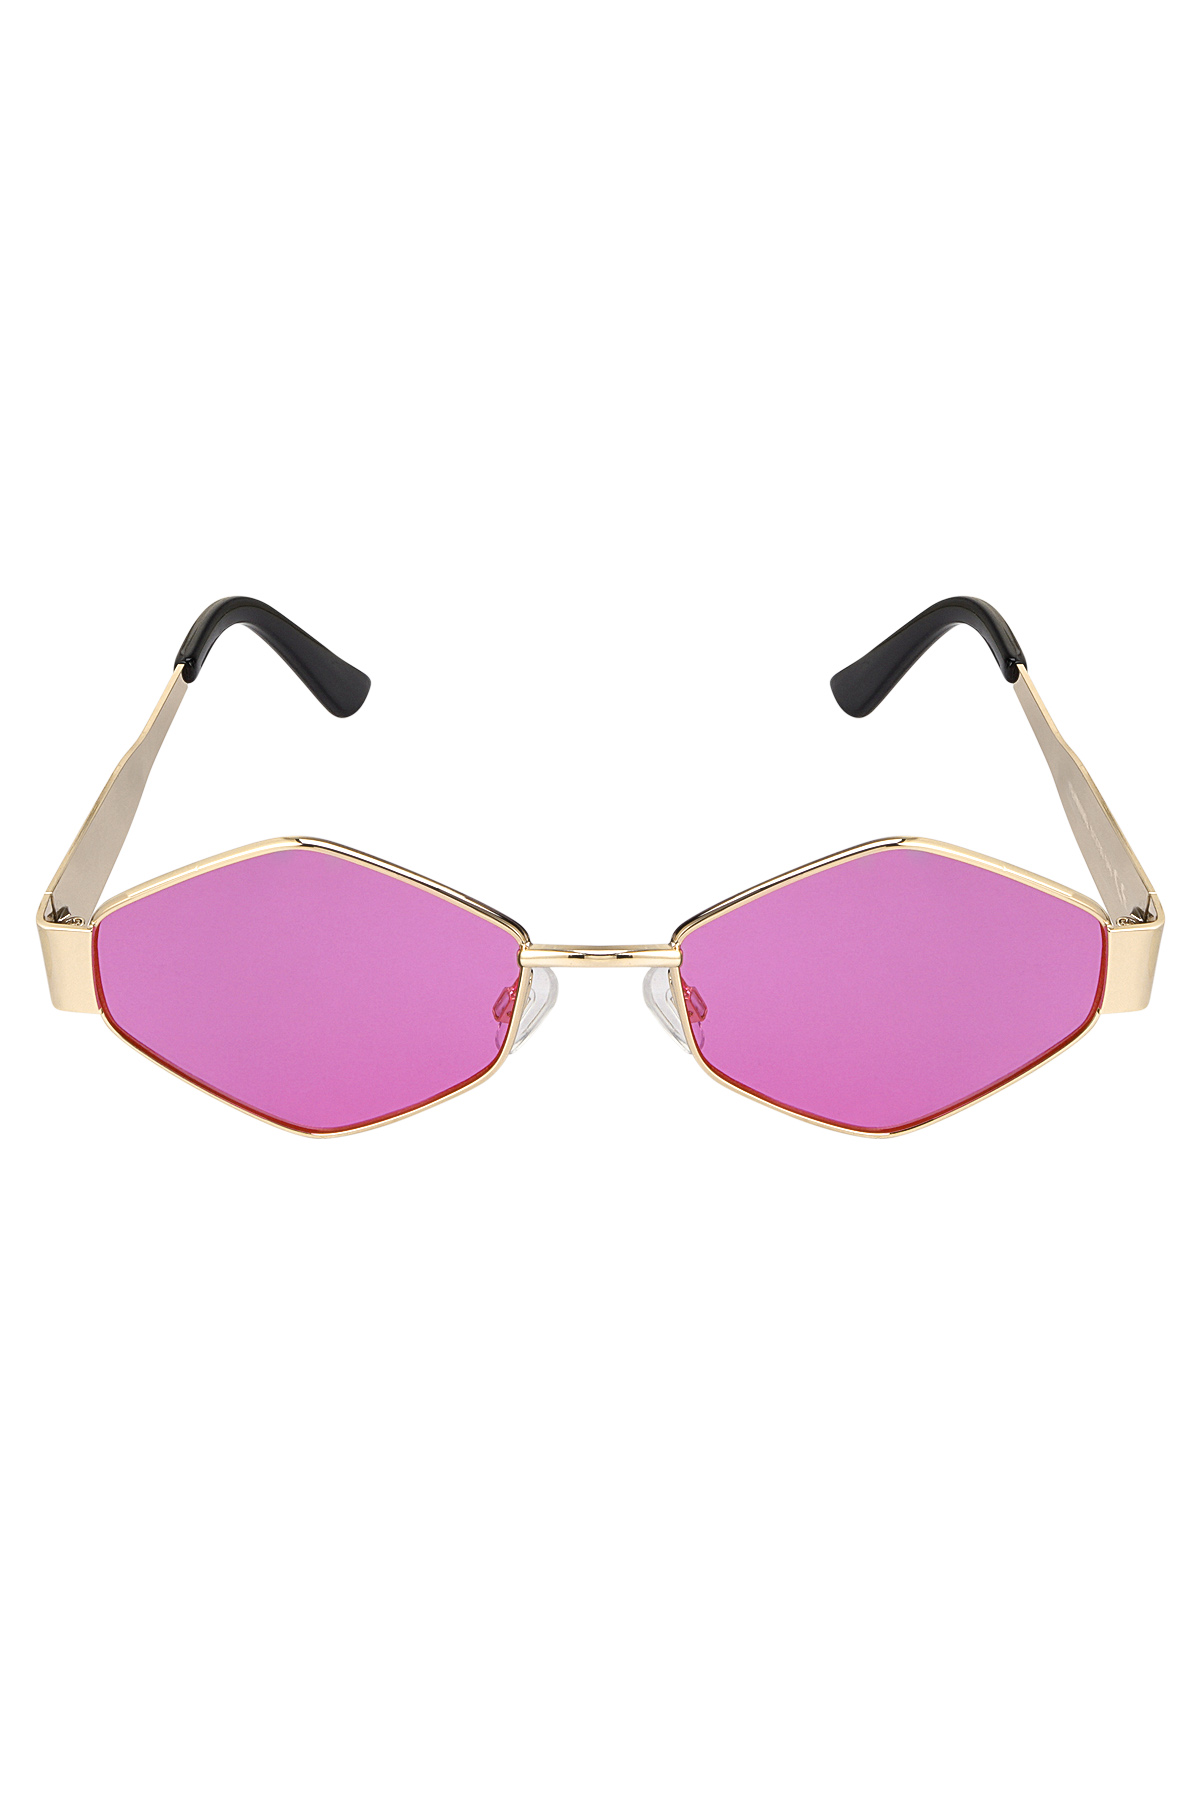 Sunglasses all night long - pink Picture6